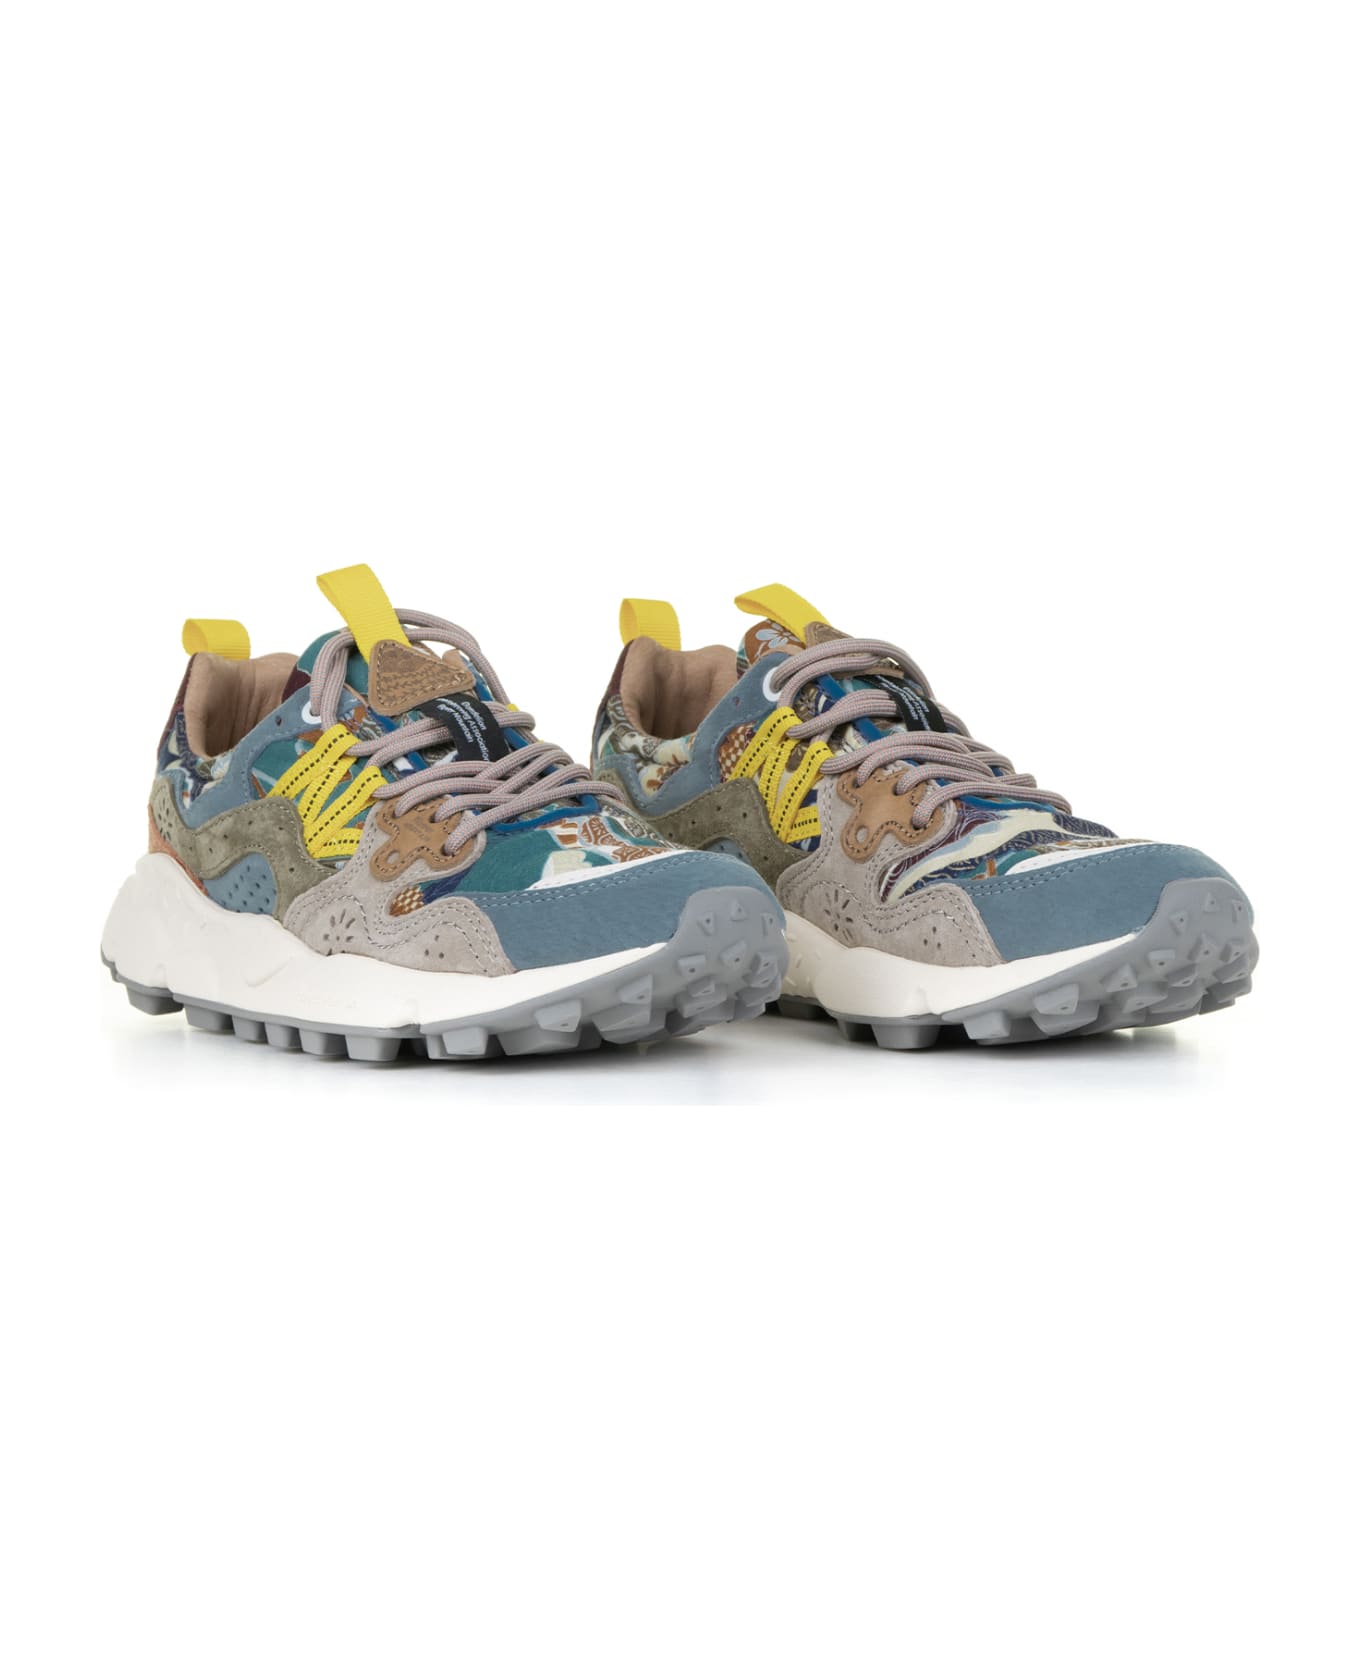 Flower Mountain Blue Yamano Sneakers In Suede And Nylon - TAUPE AZURE スニーカー